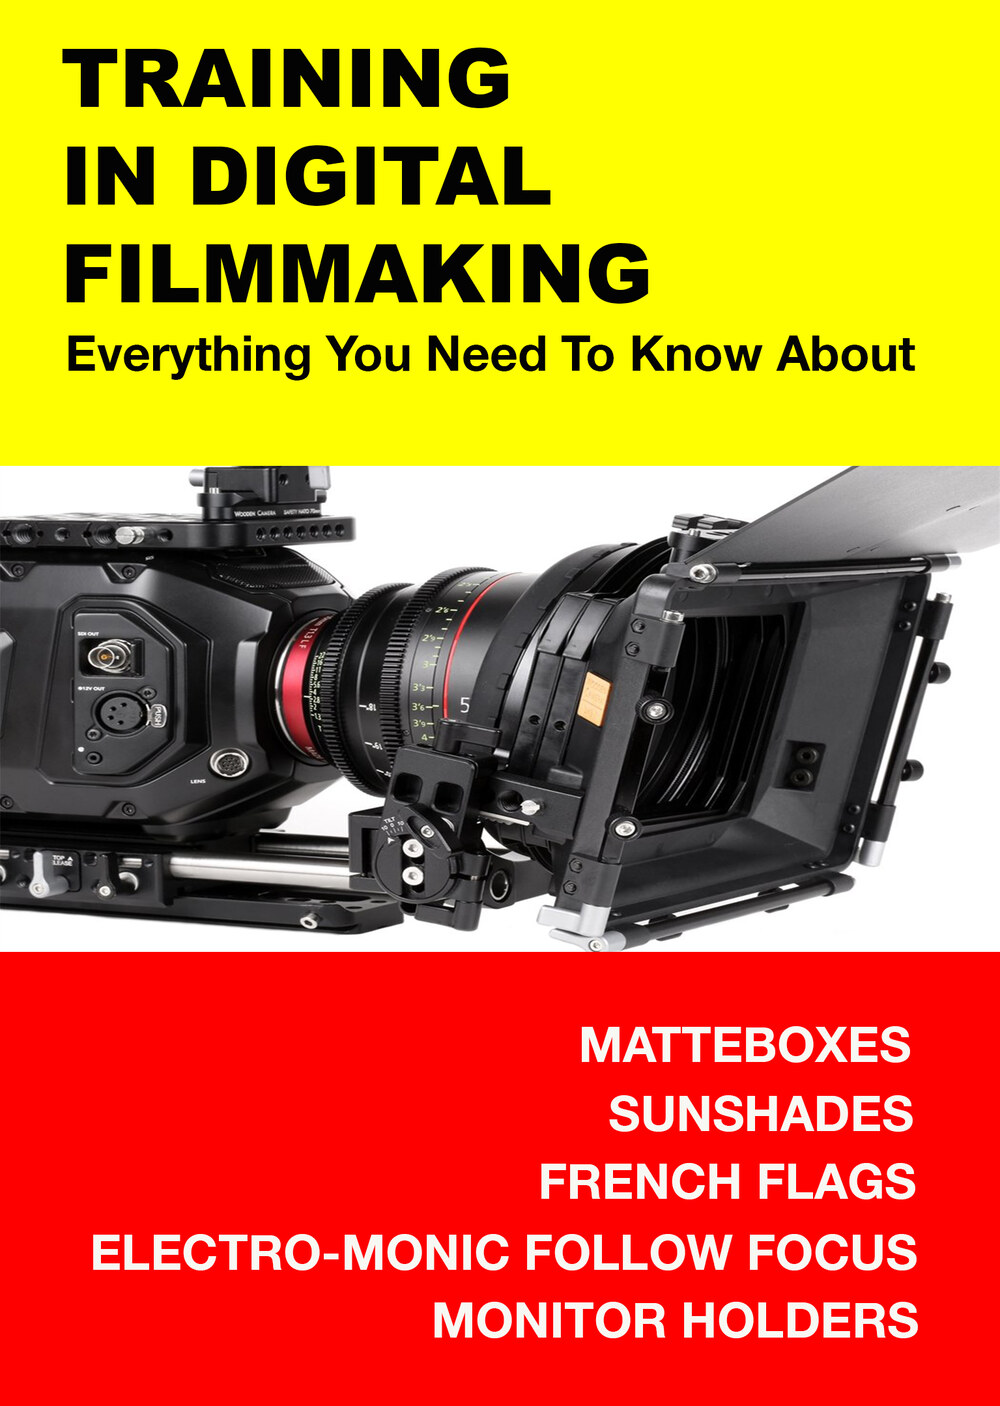 F3000 - Everything You Need to Know About Matteboxes, Sunshades, French Flags, Electro-Monic Follow Focus & Monitor Holders